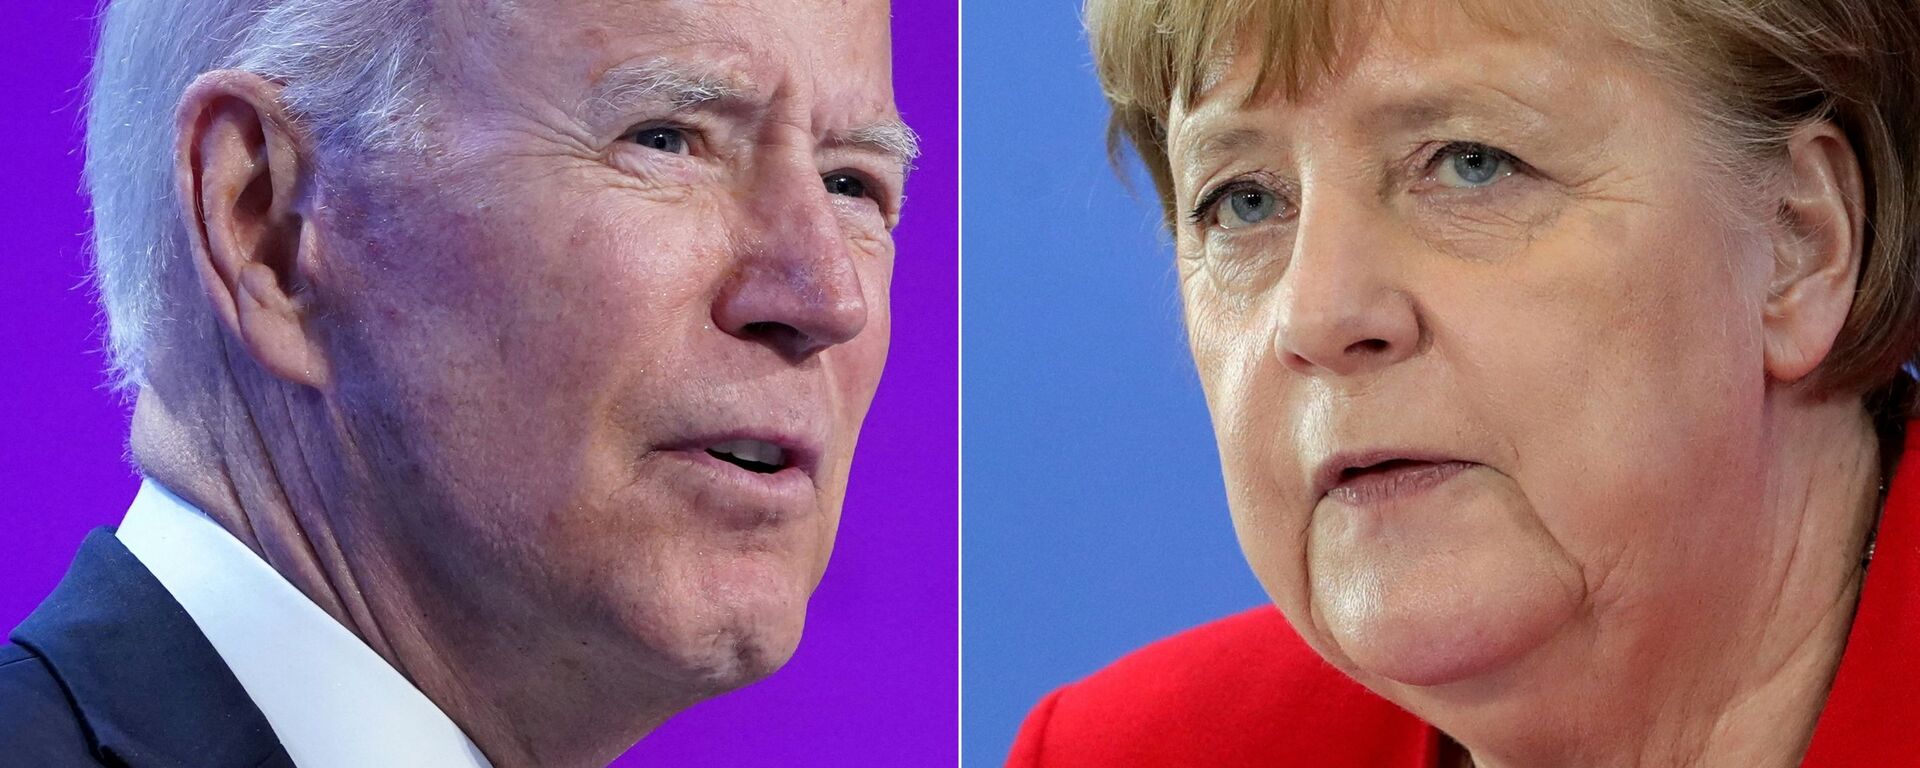 This combination of pictures created on July 14, 2021 shows US President Joe Biden in Washington, DC on July 2, 2021 and German Chancellor Angela Merkel in Berlin on May 6, 2020. - US President Joe Biden will participate in a bilateral meeting with Dr. Angela Merkel, Chancellor of the Federal Republic of Germany on July 15 in Washington DC, this visit will affirm the deep and enduring bilateral ties between the United States and Germany. - Sputnik 日本, 1920, 31.10.2021